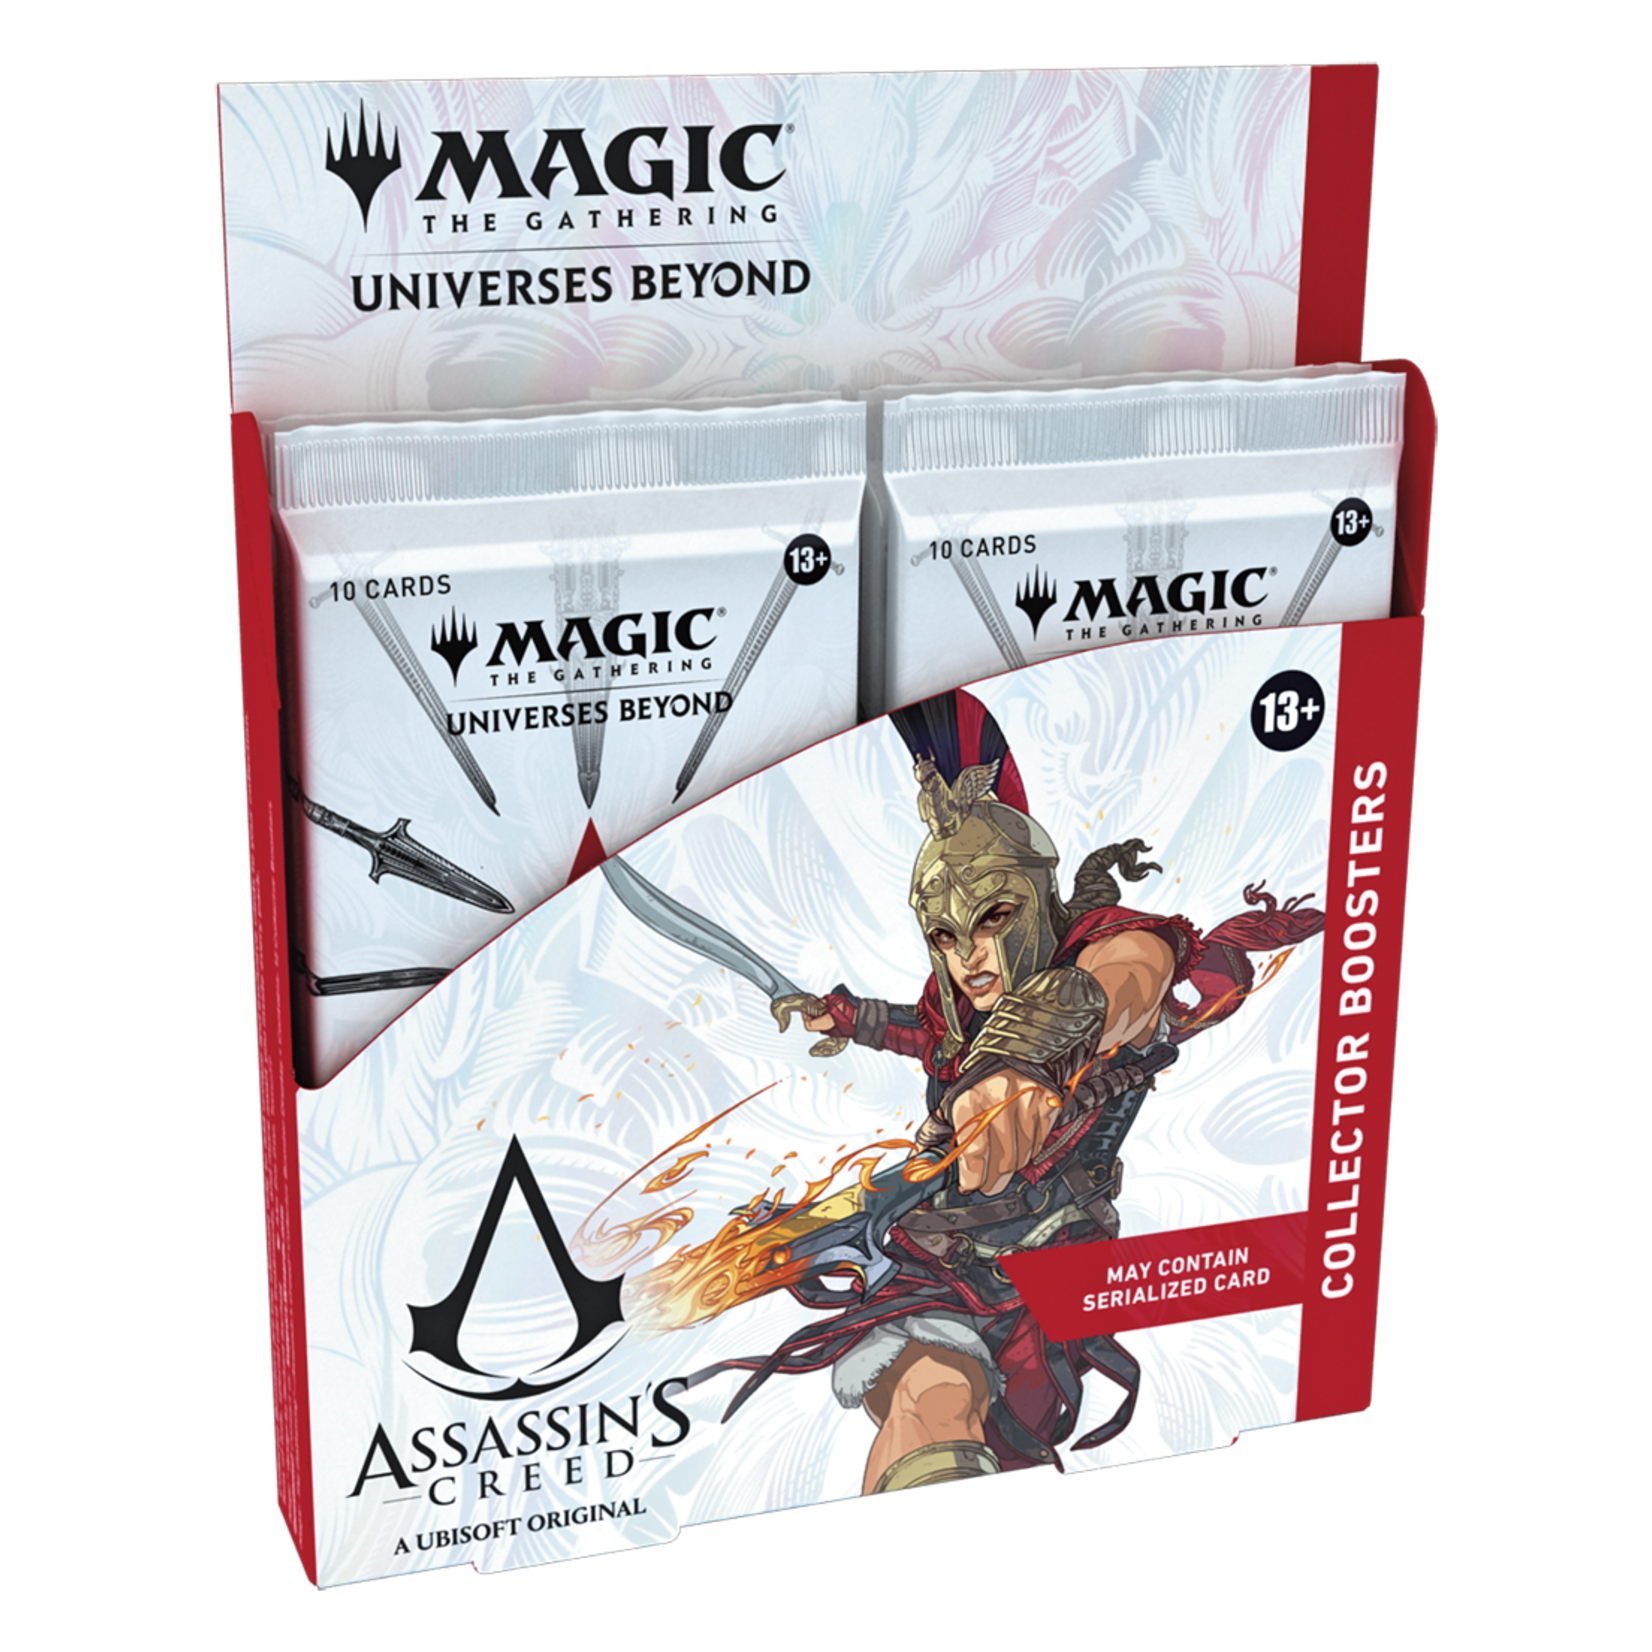 Magic: The Gathering Magic: The Gathering – Assassin's Creed Collector Booster Box